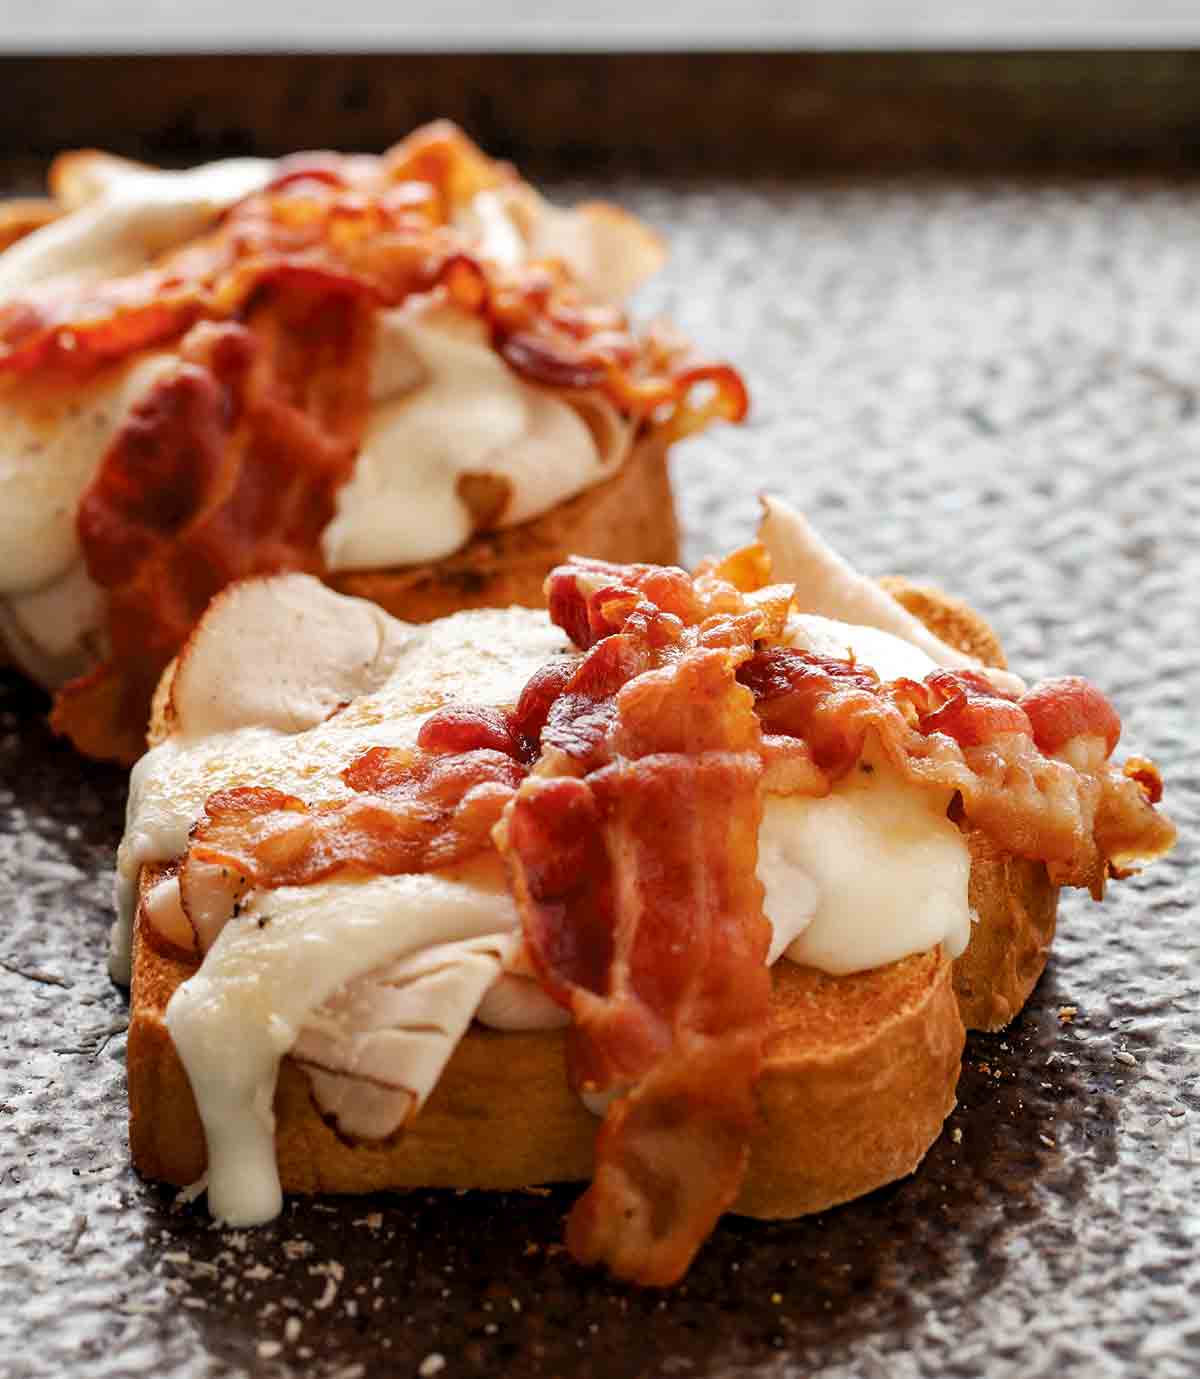 Two slices of toast, each topped with sliced turkey, melted cheese, and two slices of bacon.